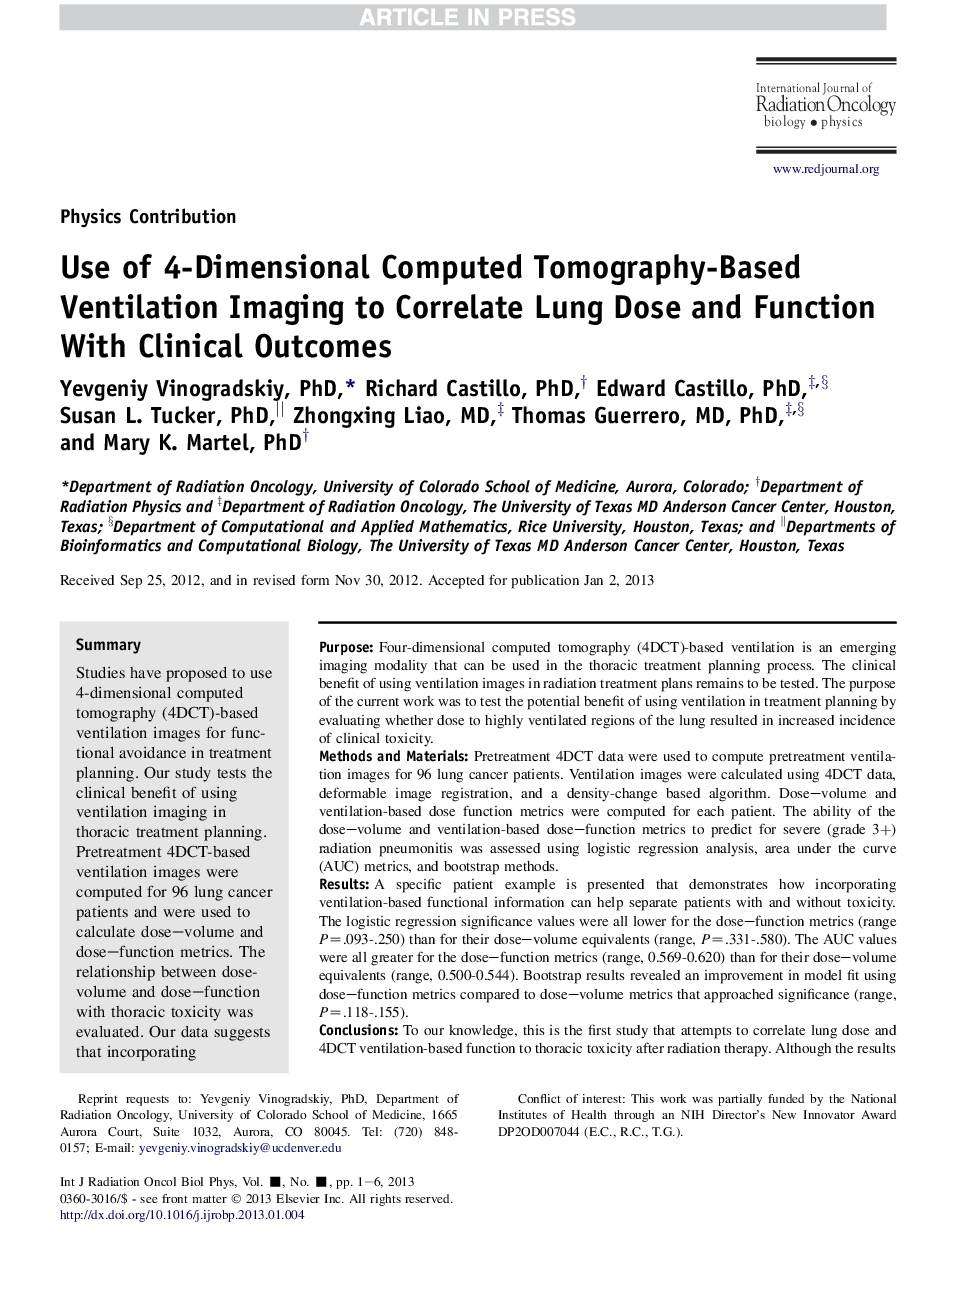 Use of 4-Dimensional Computed Tomography-Based Ventilation Imaging to Correlate Lung Dose and Function With Clinical Outcomes